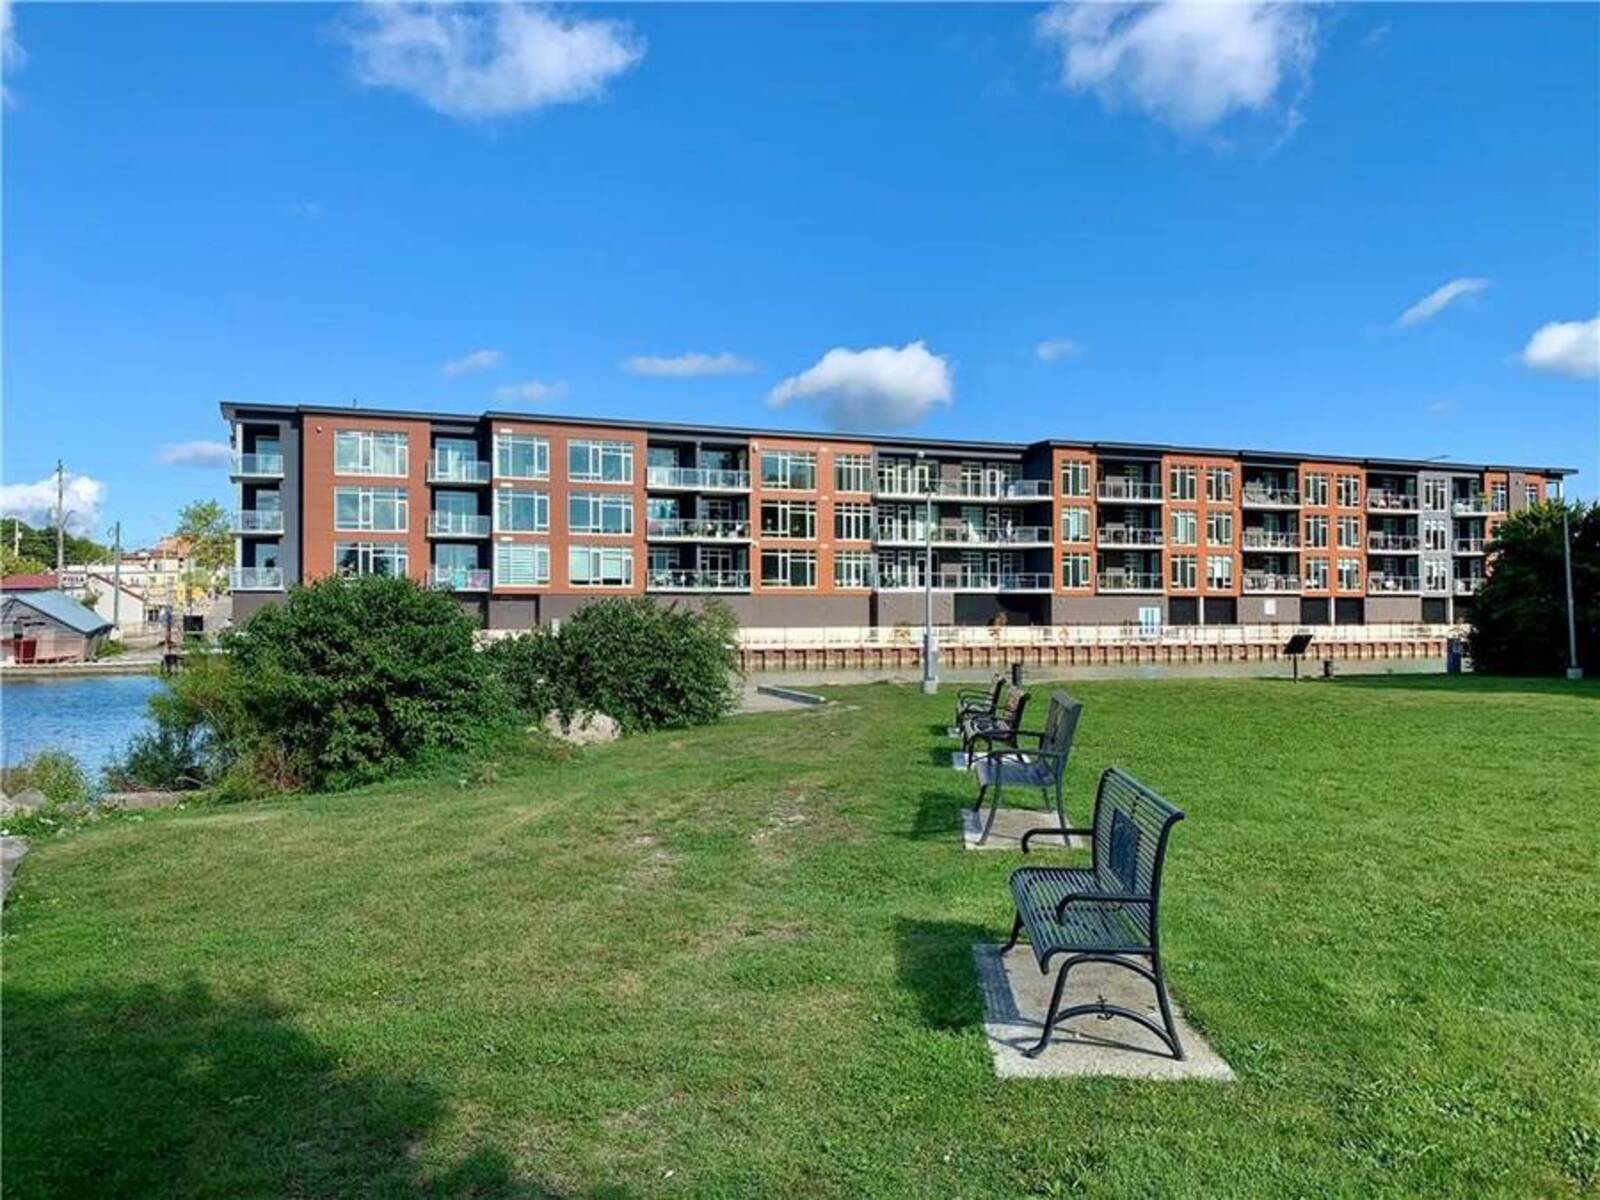 38 HARBOUR Street|Unit #206, Port Dover, Ontario N0A 1N0